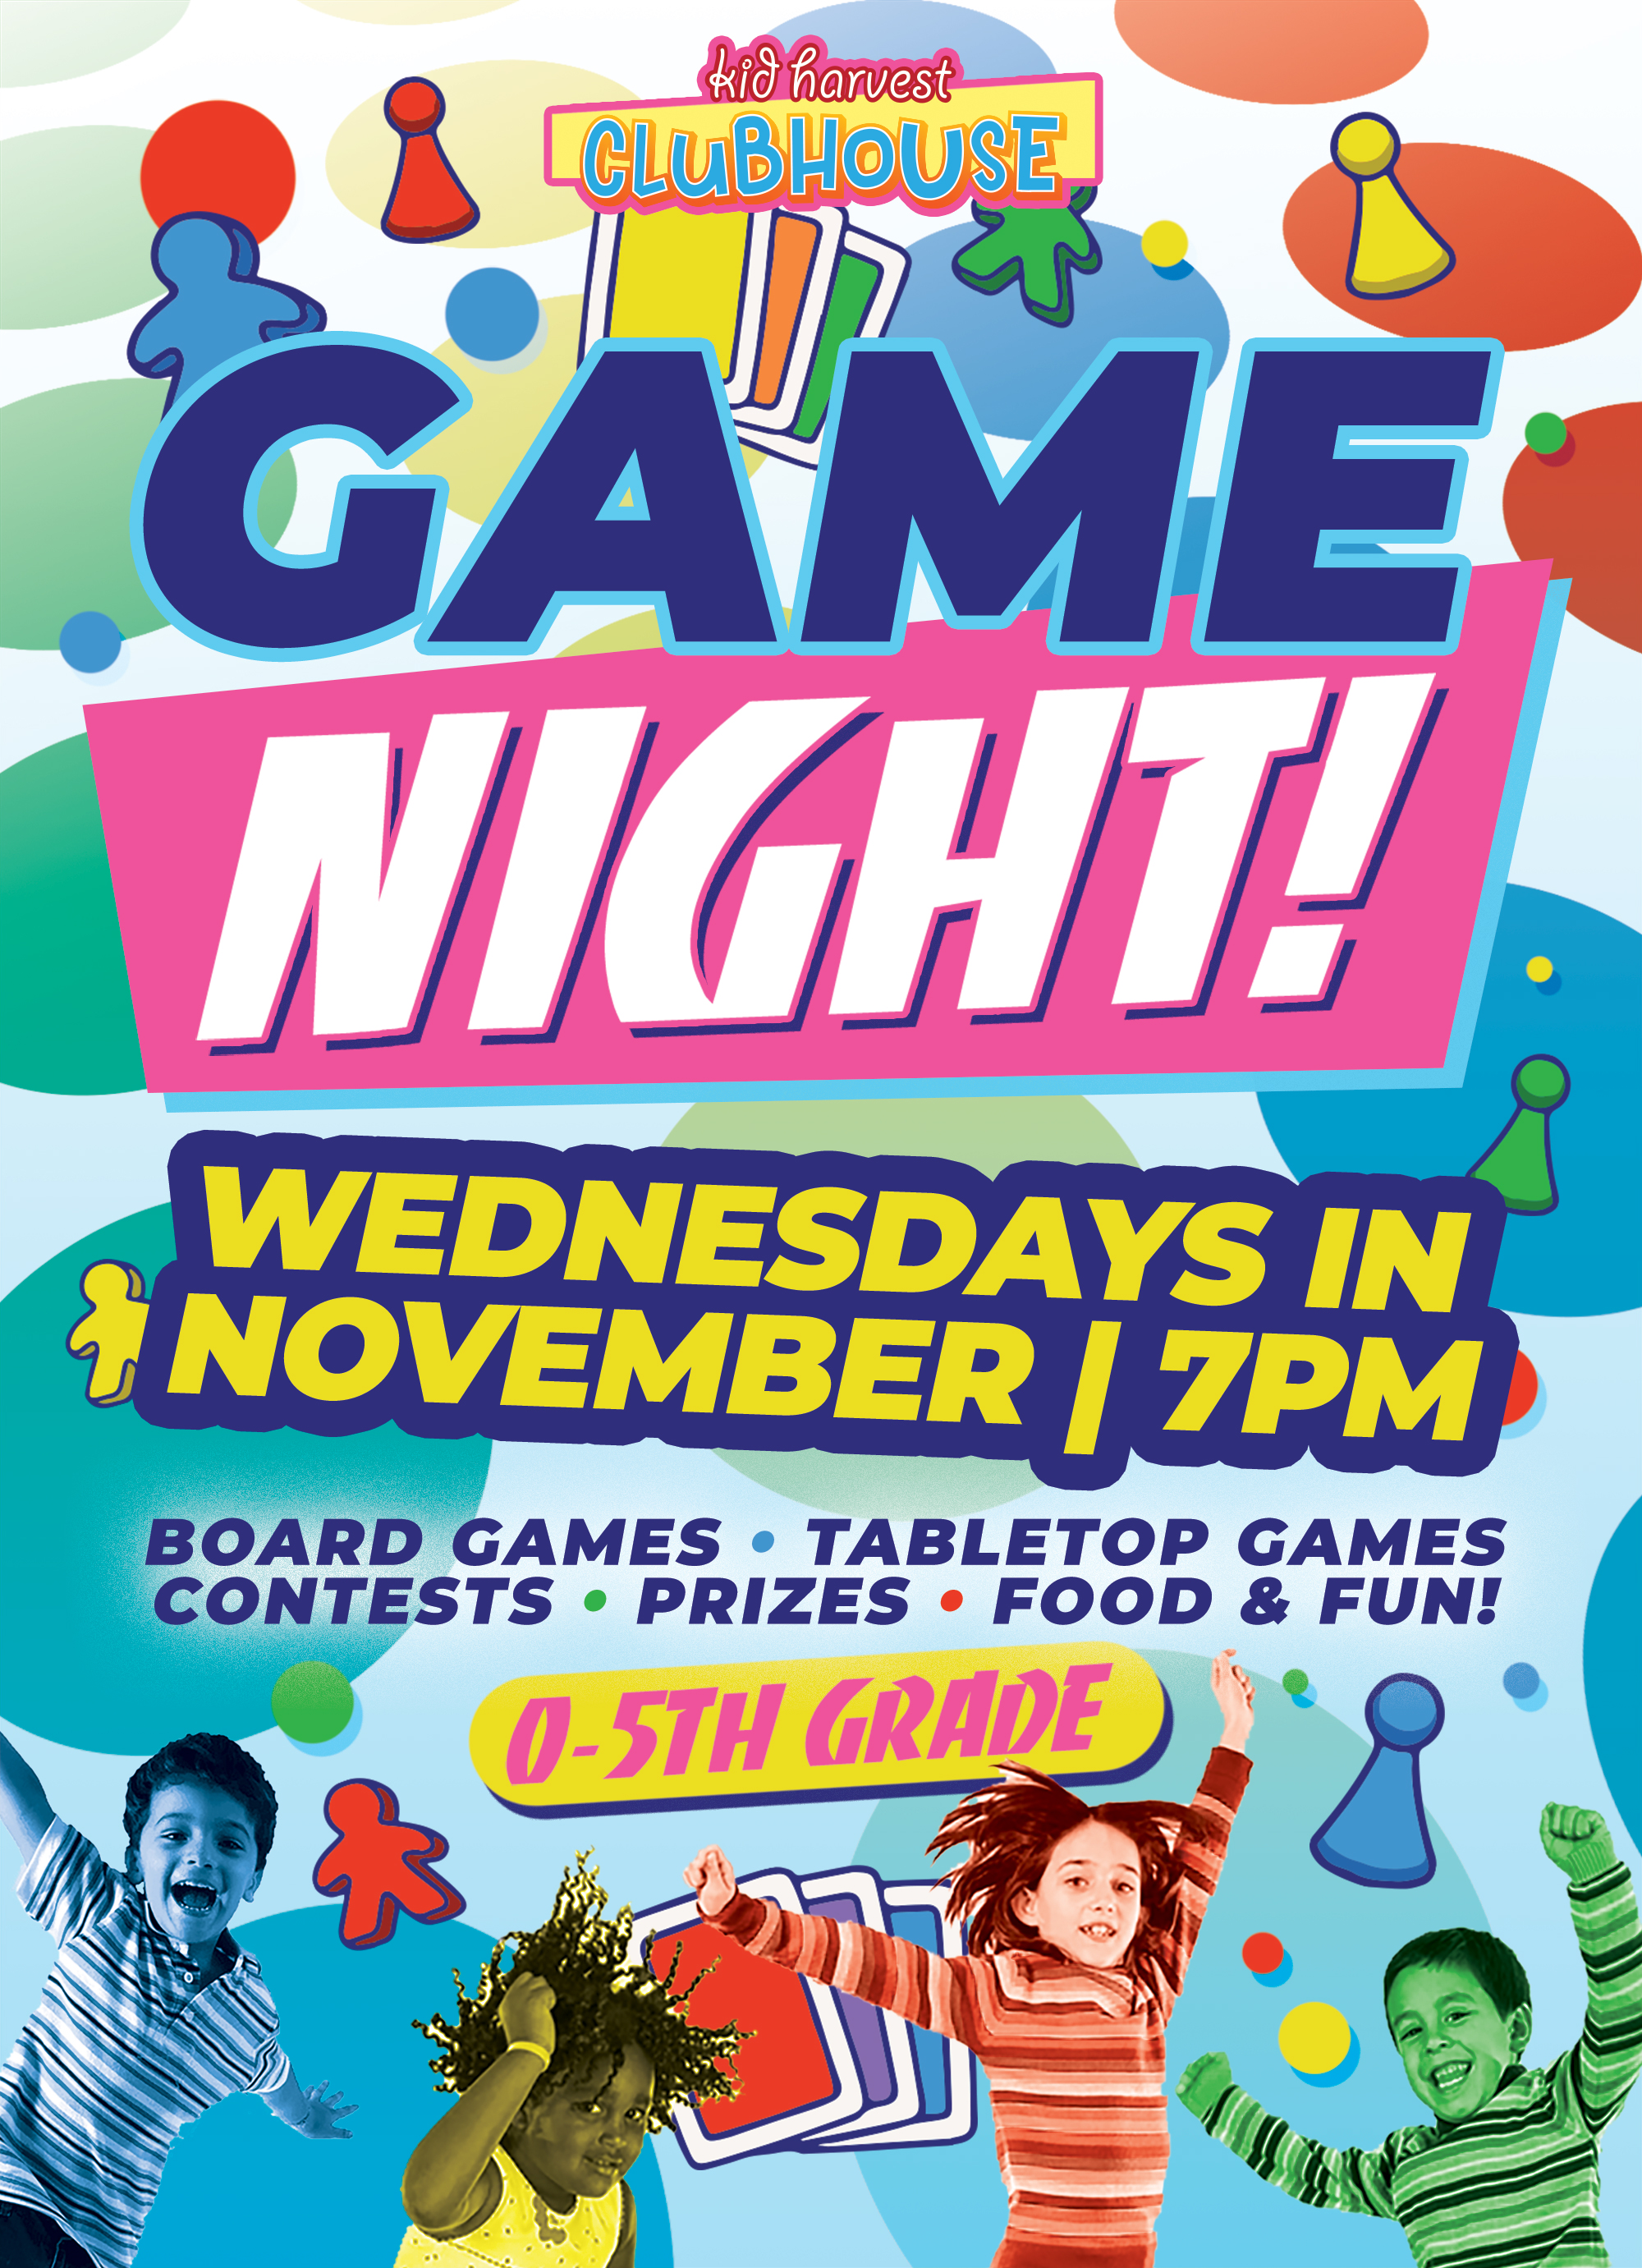 Kid Harvest Game Night! Wednesdays in November at 7PM Board Games Tabletop Games Contests Prizes Food and Fun! 0-5th Grade.